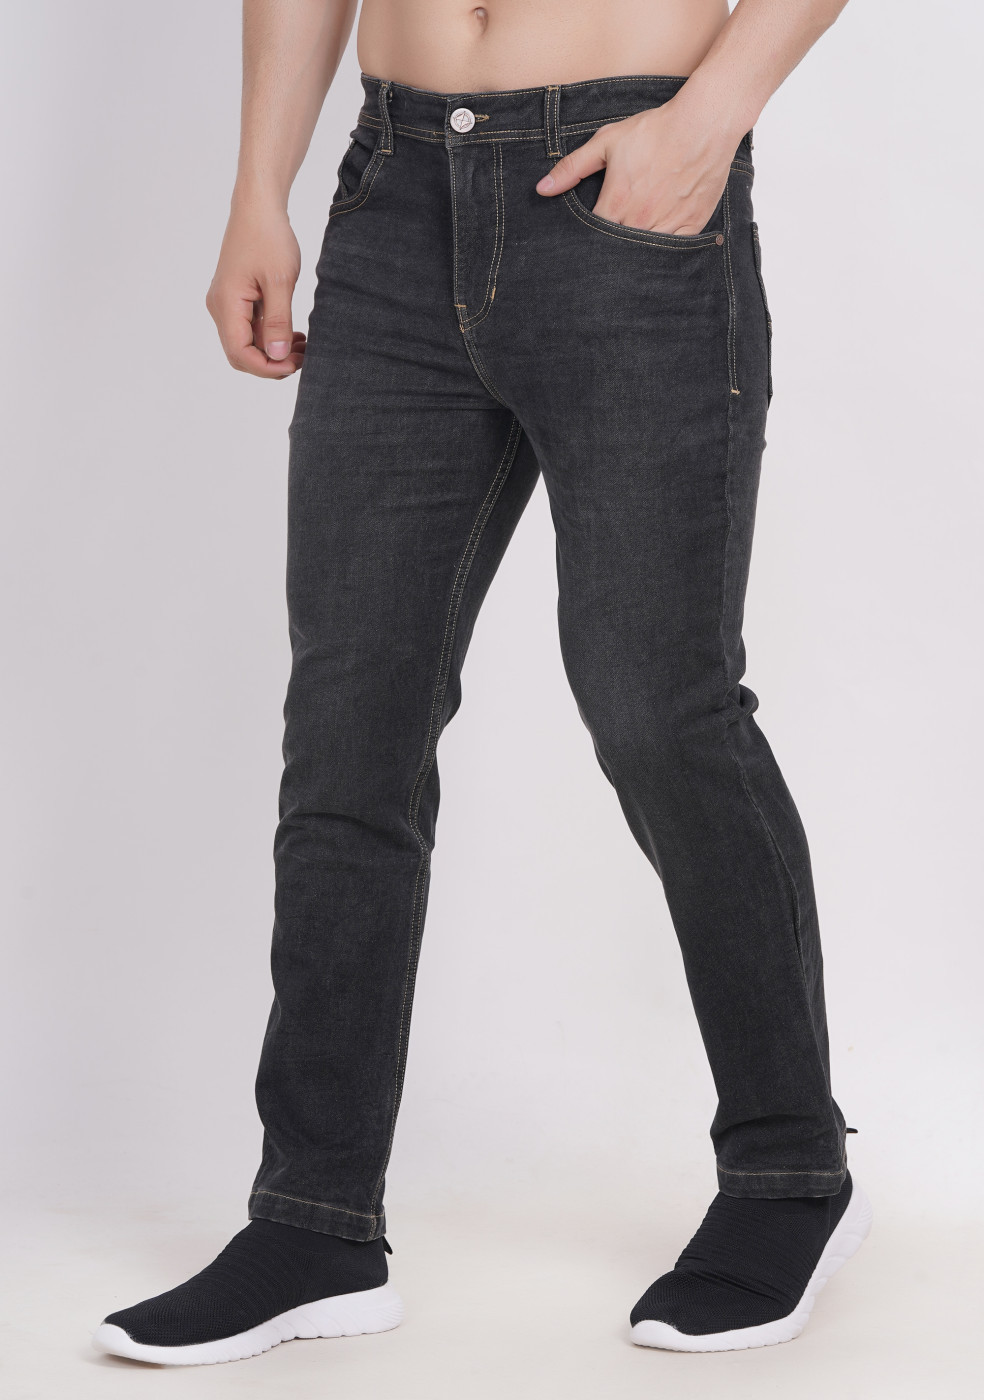 New Collection Of Men's Jeans